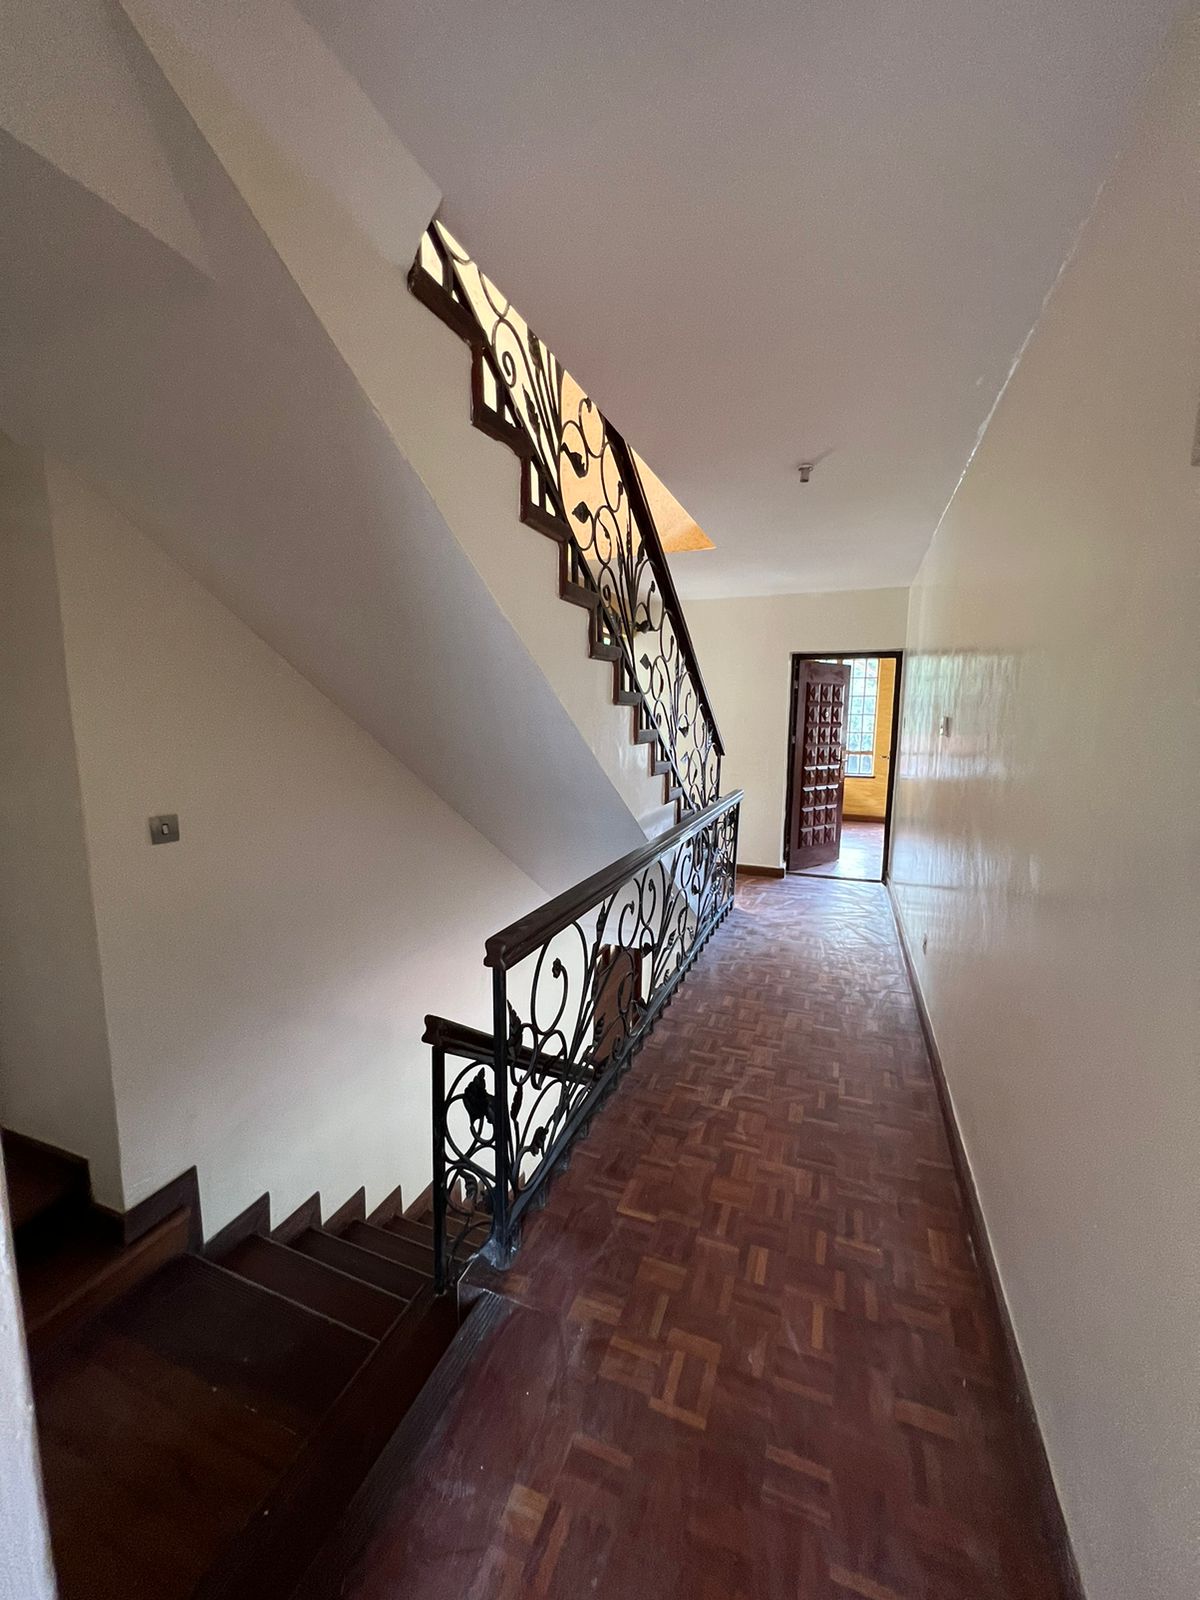 5bedroom plus dsq townhouse to let In the heart of lavington, Nairobi. Rent per month 225,000. Musilli Homes